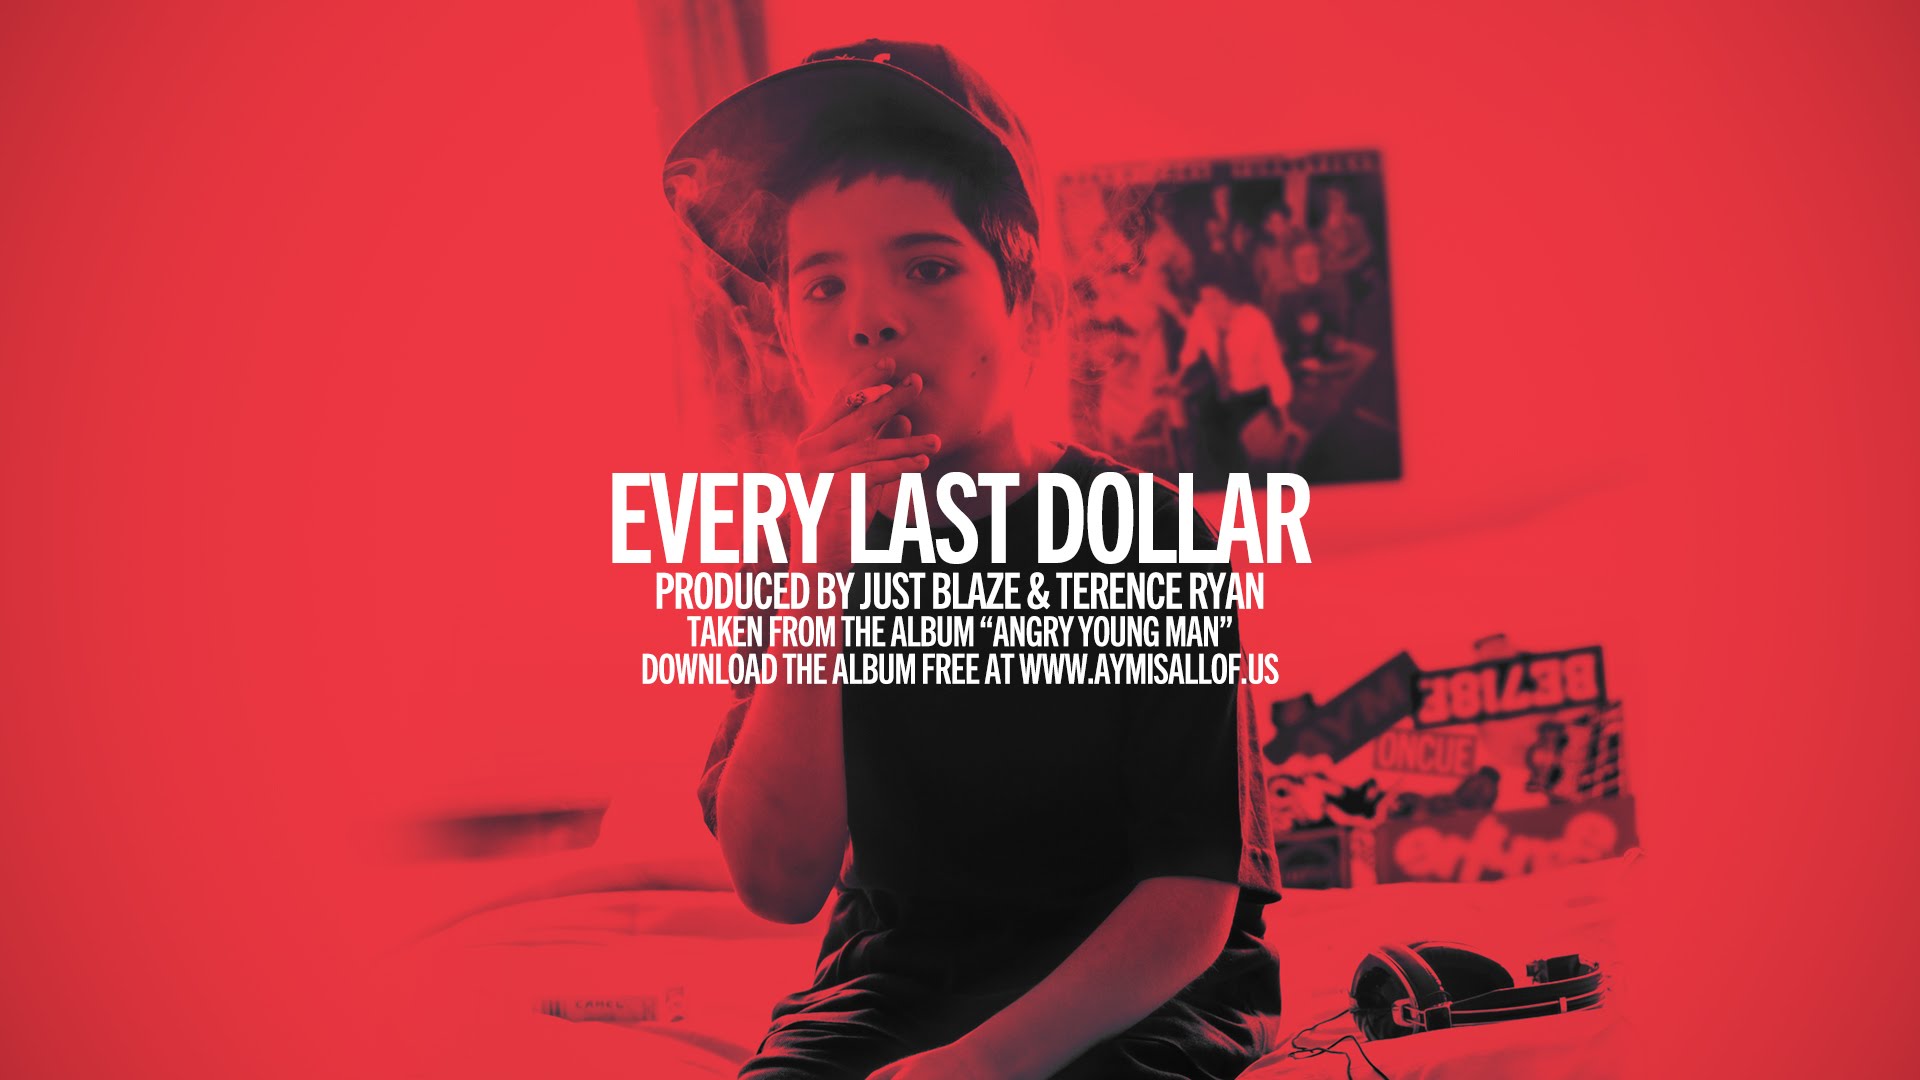 OnCue - Every Last Dollar (prod. Just Blaze & Terence Ryan) - YouTube